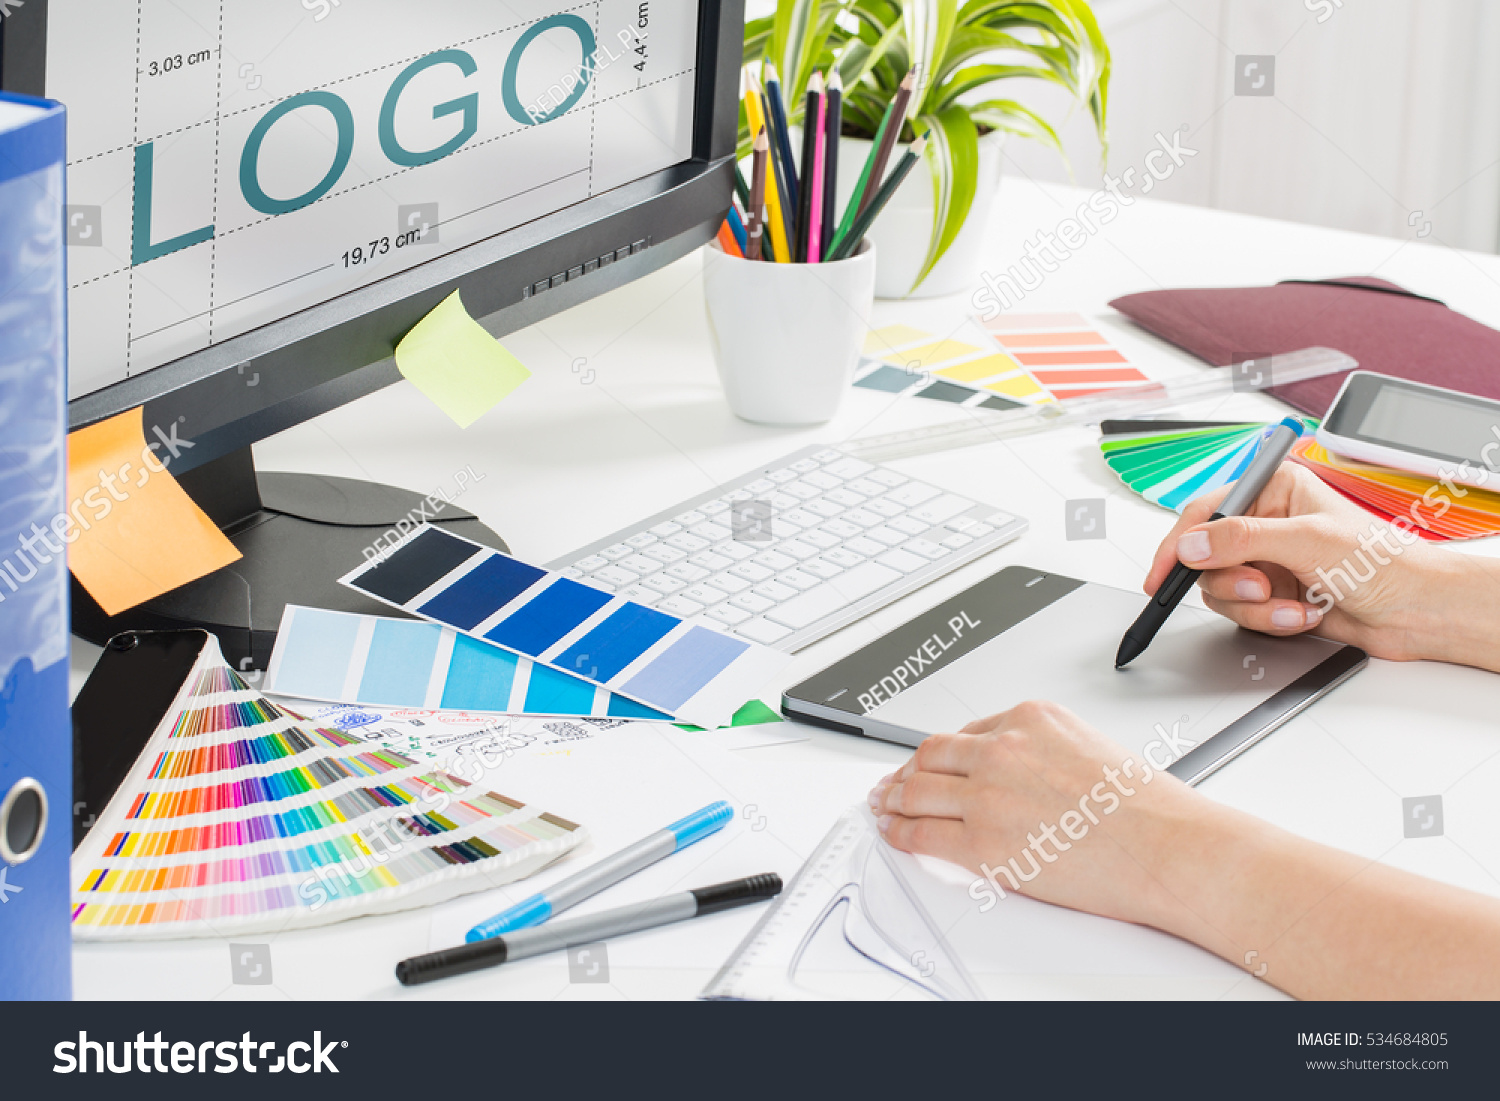 logo design brand designer sketch graphic drawing creative creativity draw studying work tablet concept - stock image #534684805